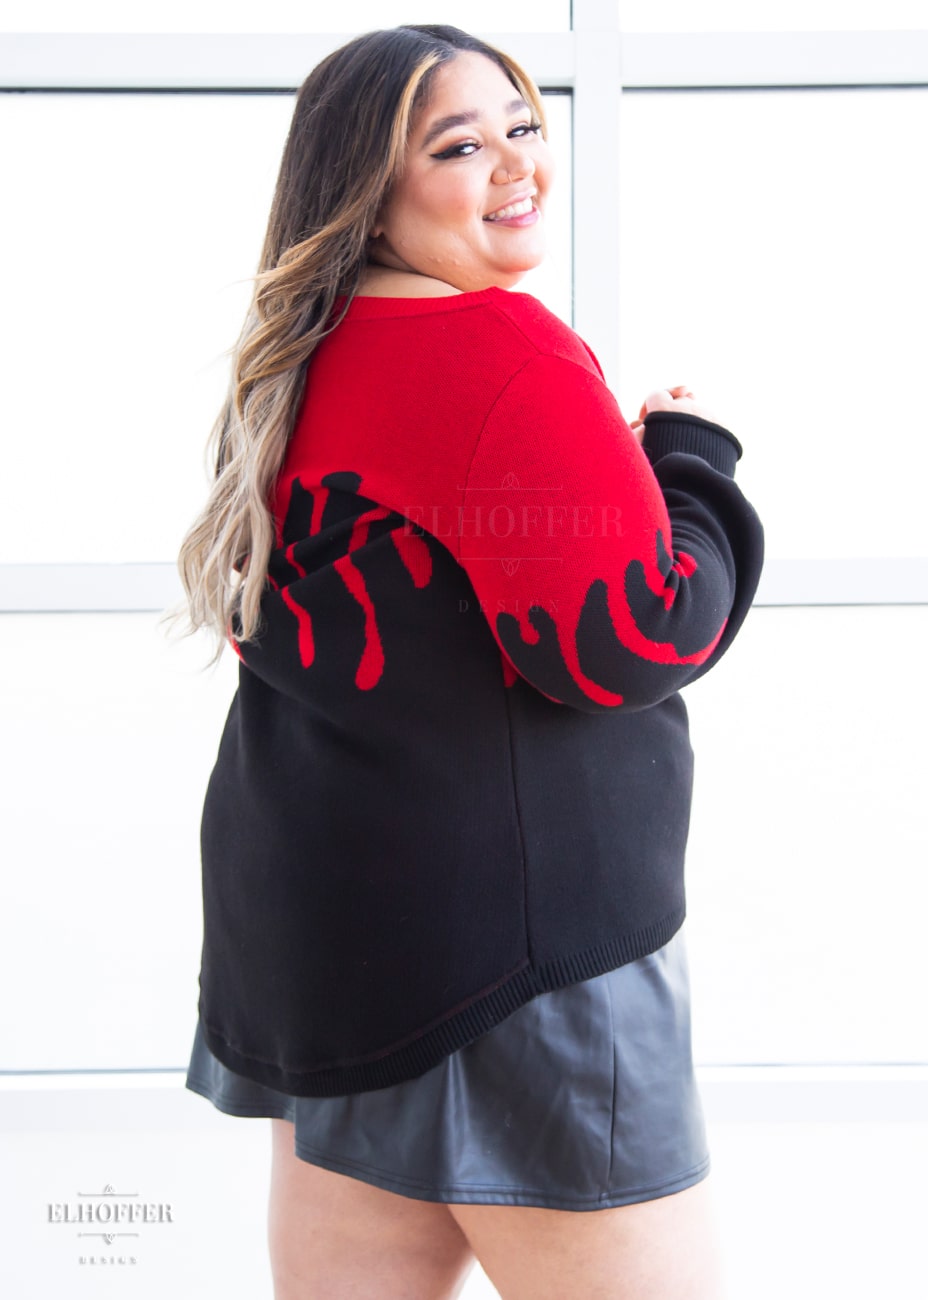 Cori, a sun kissed skinned 2xl model with long balayage hair, is smiling while wearing an oversize sweater with a bright red blood drip design that looks like it's oozing down onto a black sweater that has long billowing sleeves with thumbholes.